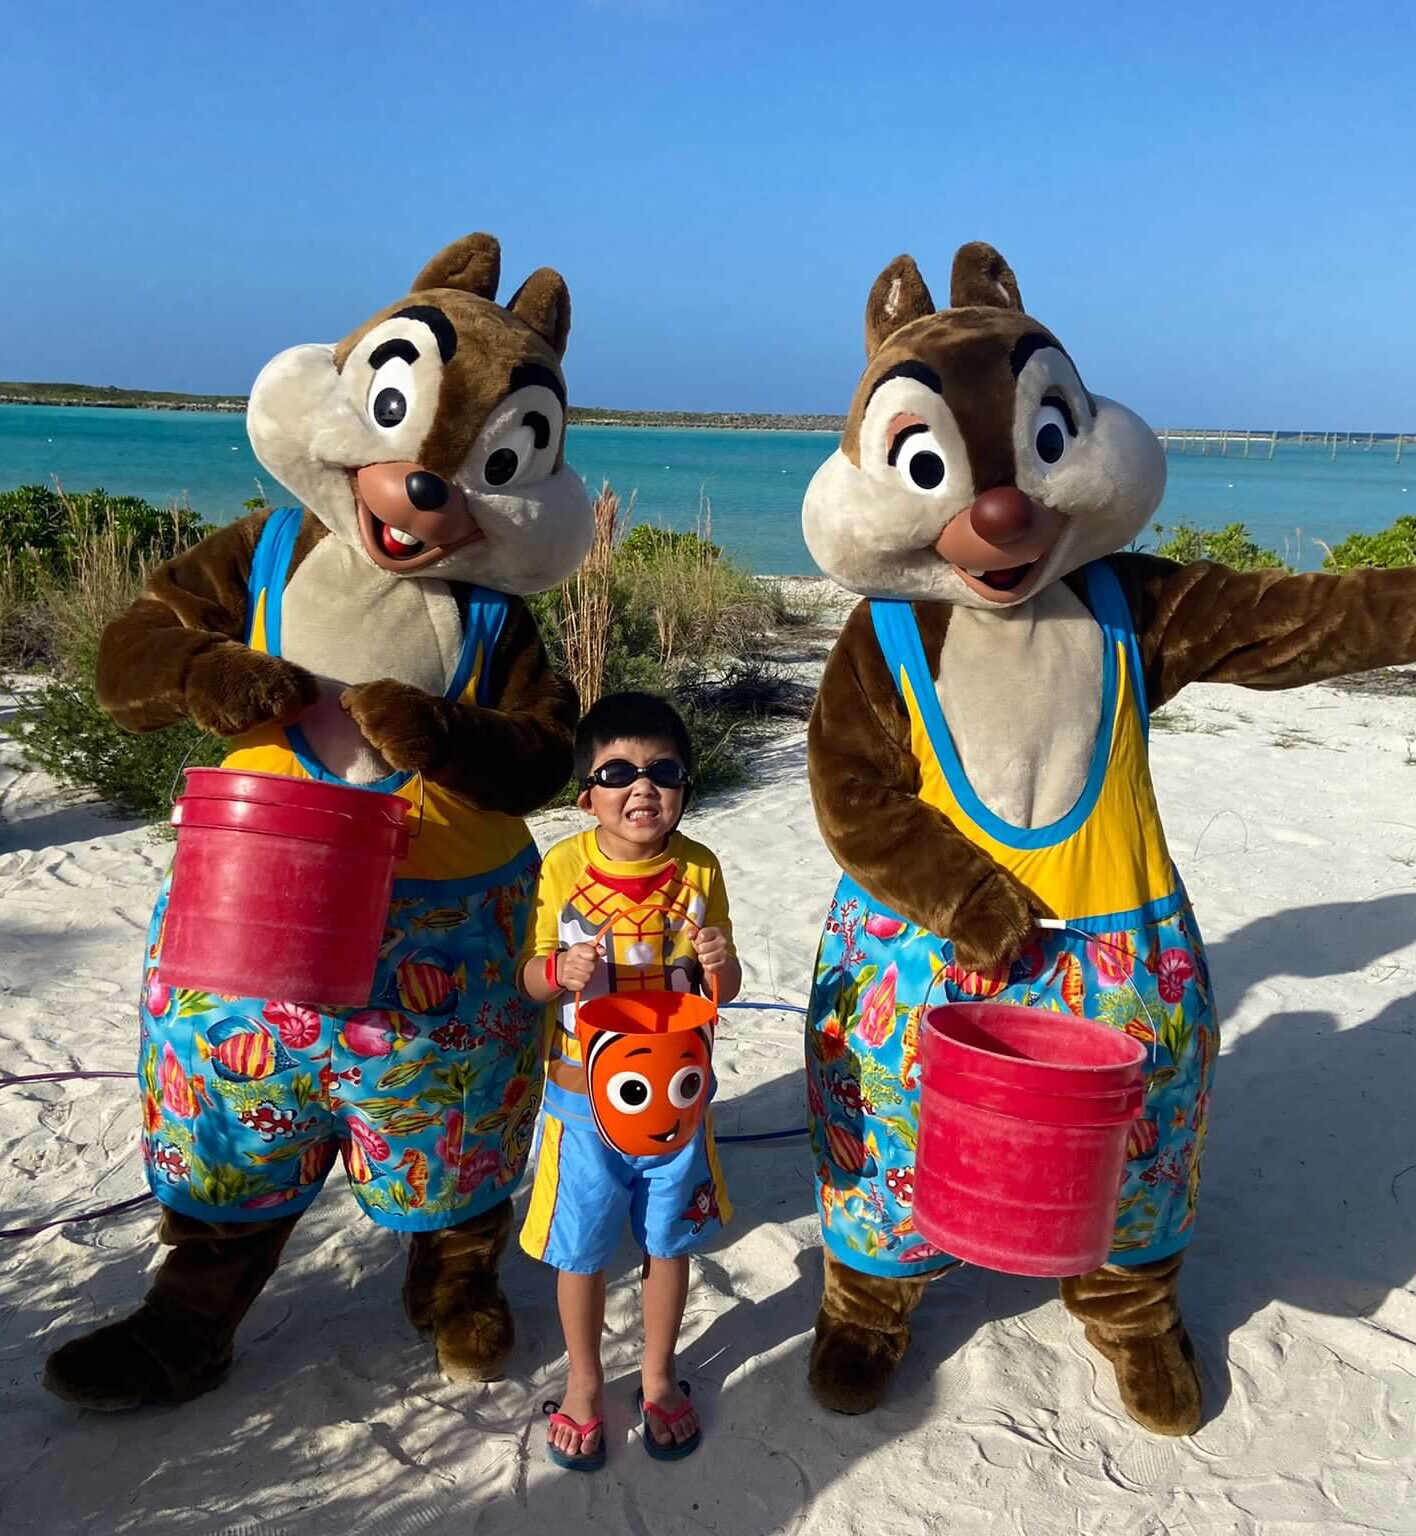 Disney Cruise line private island Castaway cay private beach characters engaging wth little boy